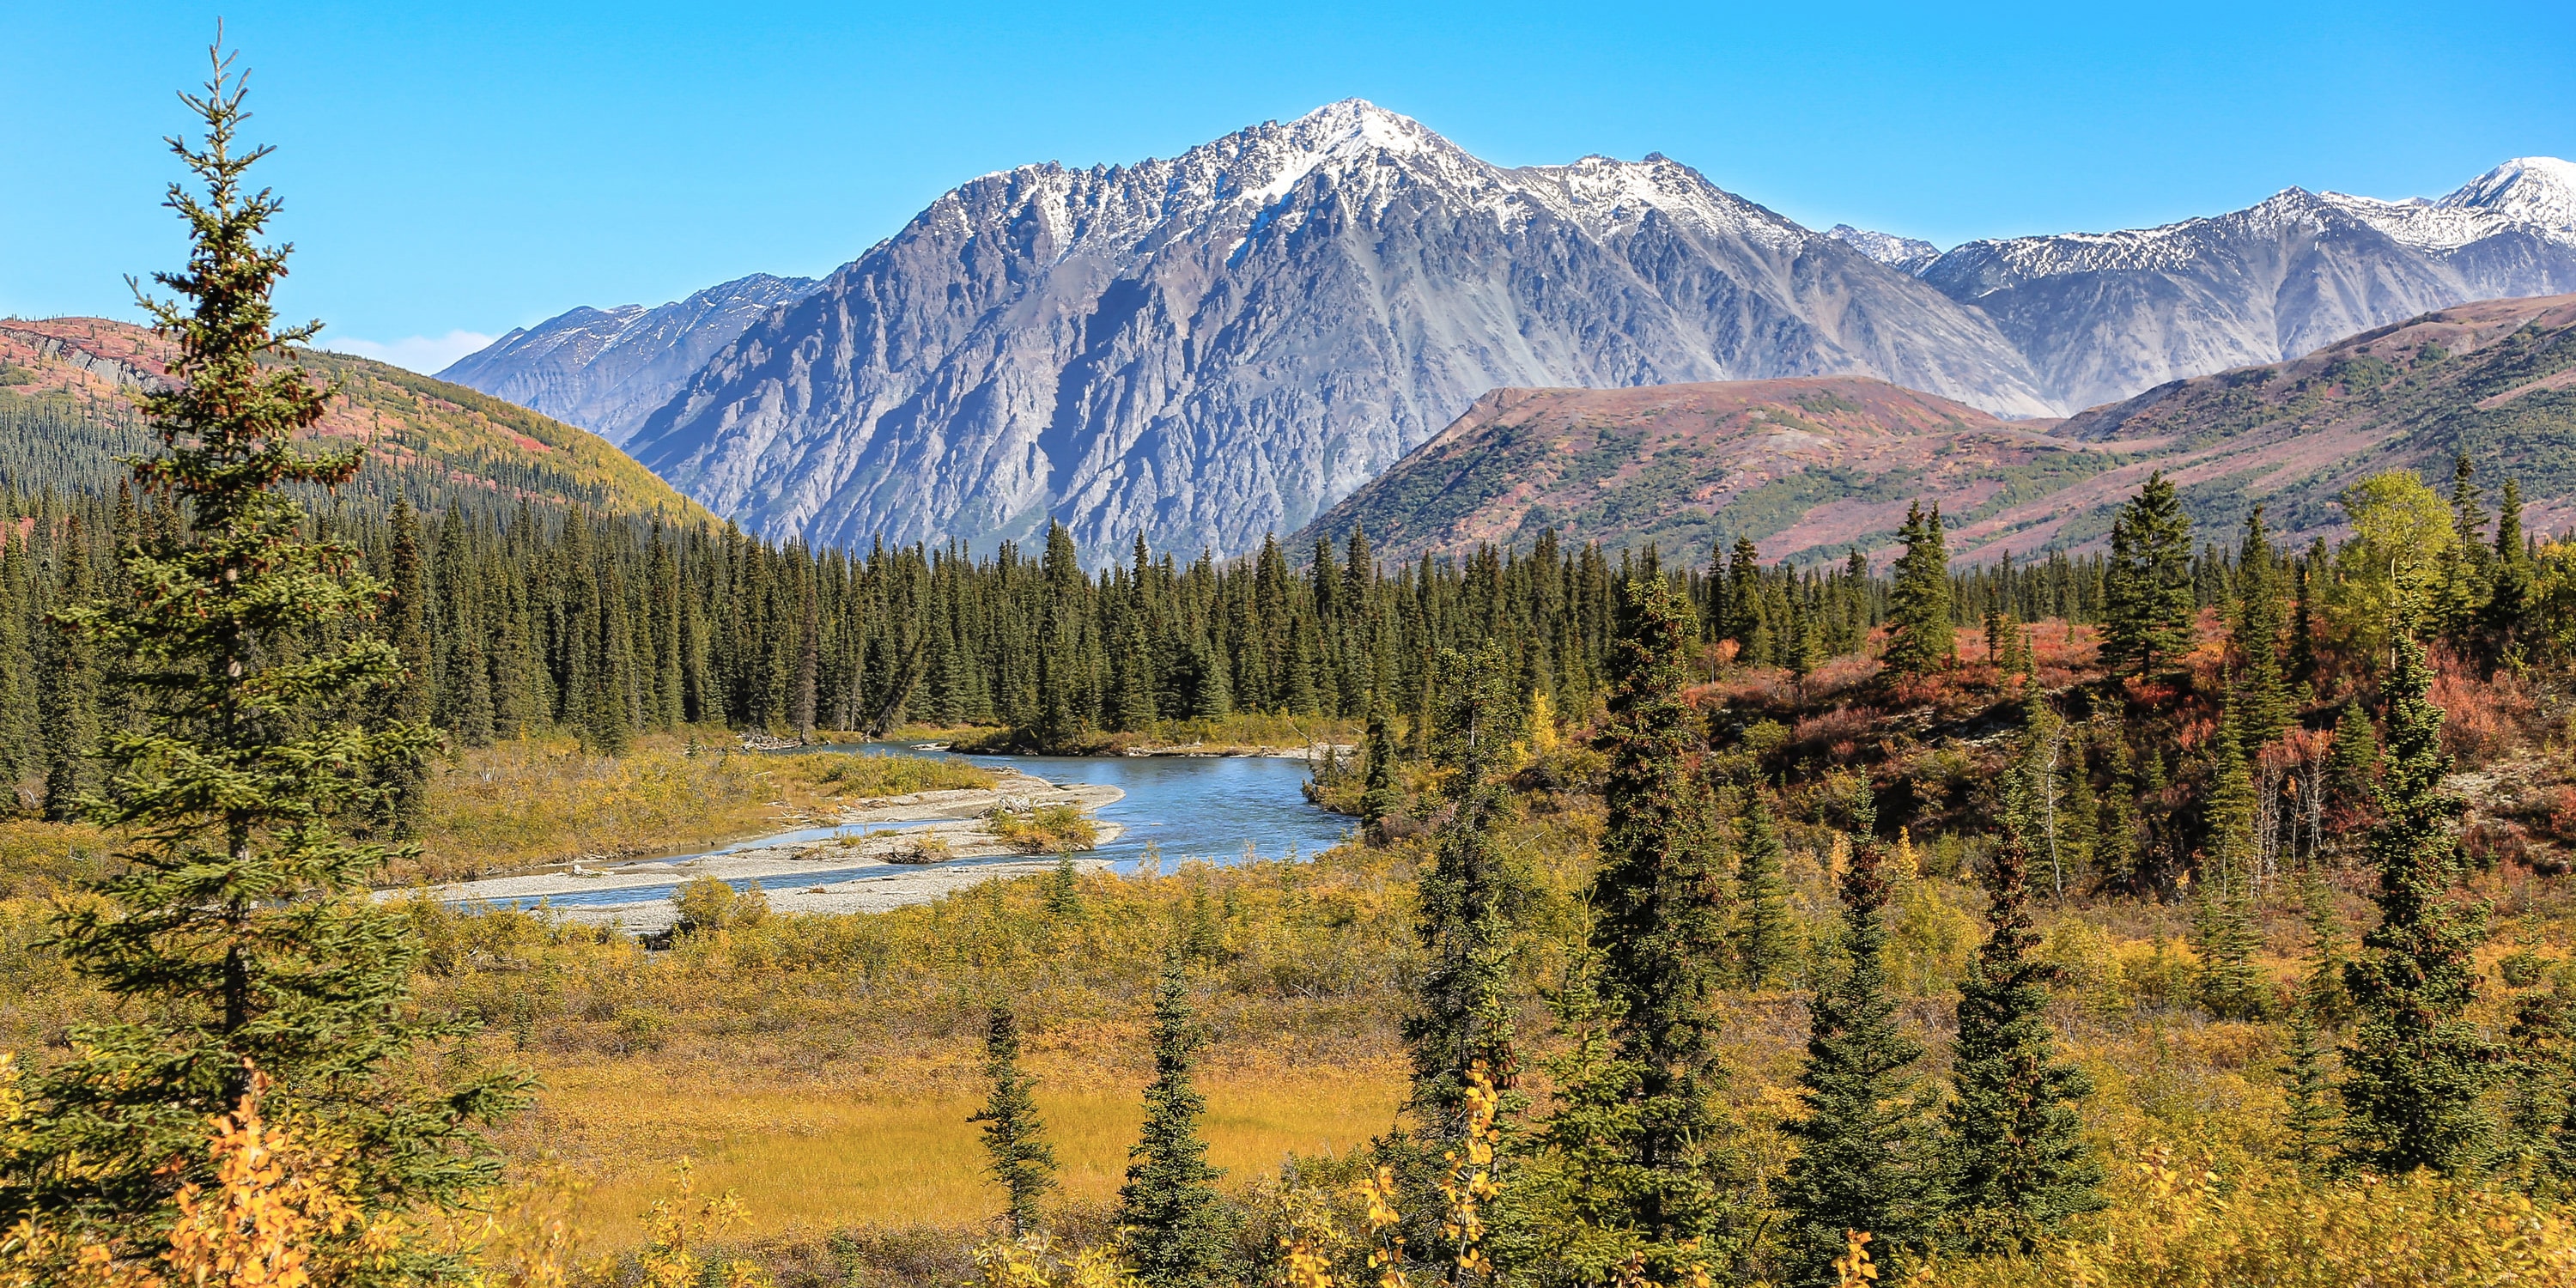 Denali National Park: Best things to see and do